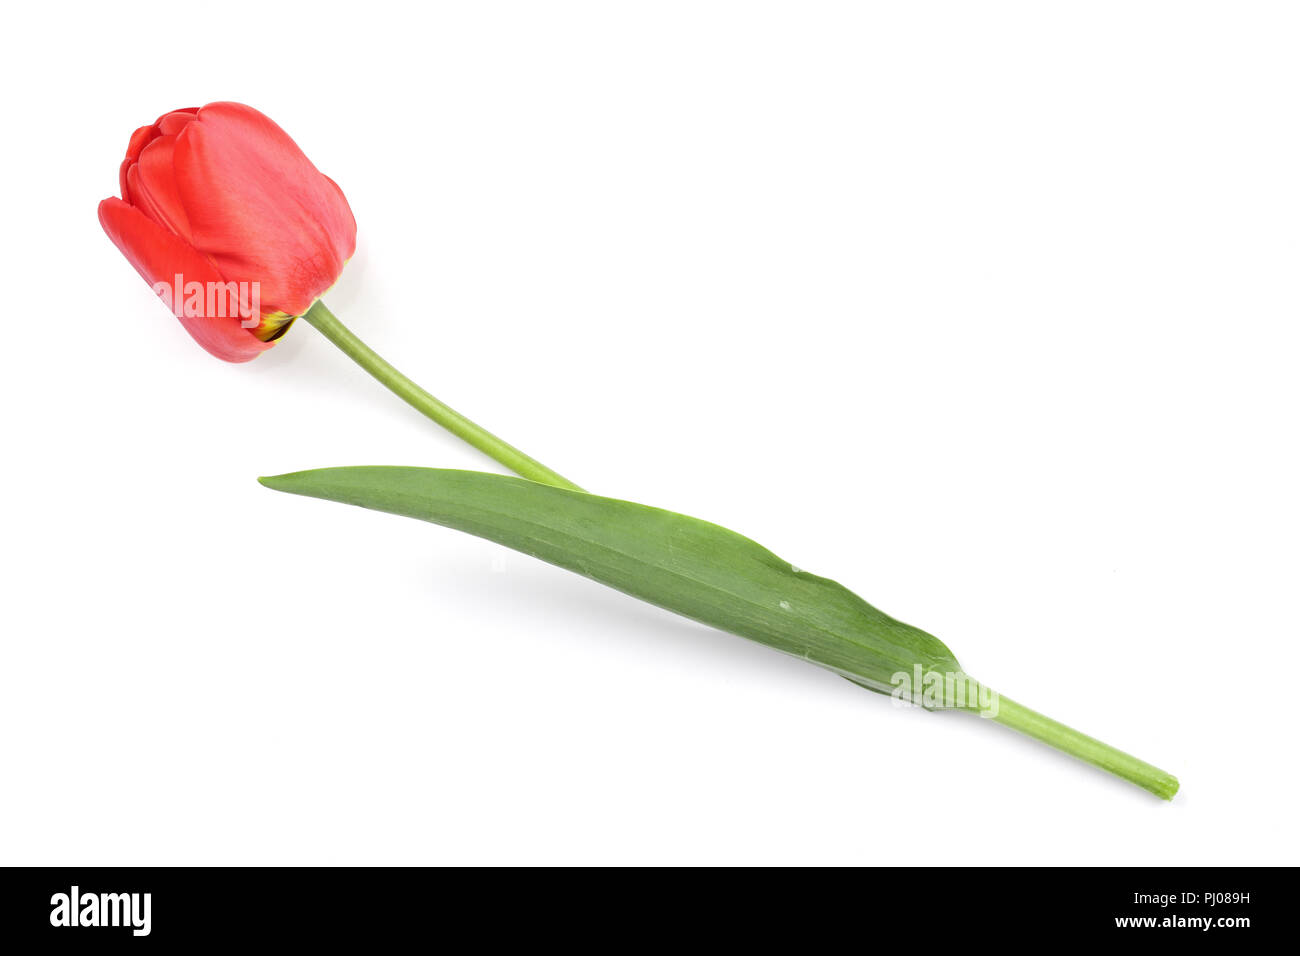 red tulips isolated on white background. Top view. Flat lay pattern. Stock Photo